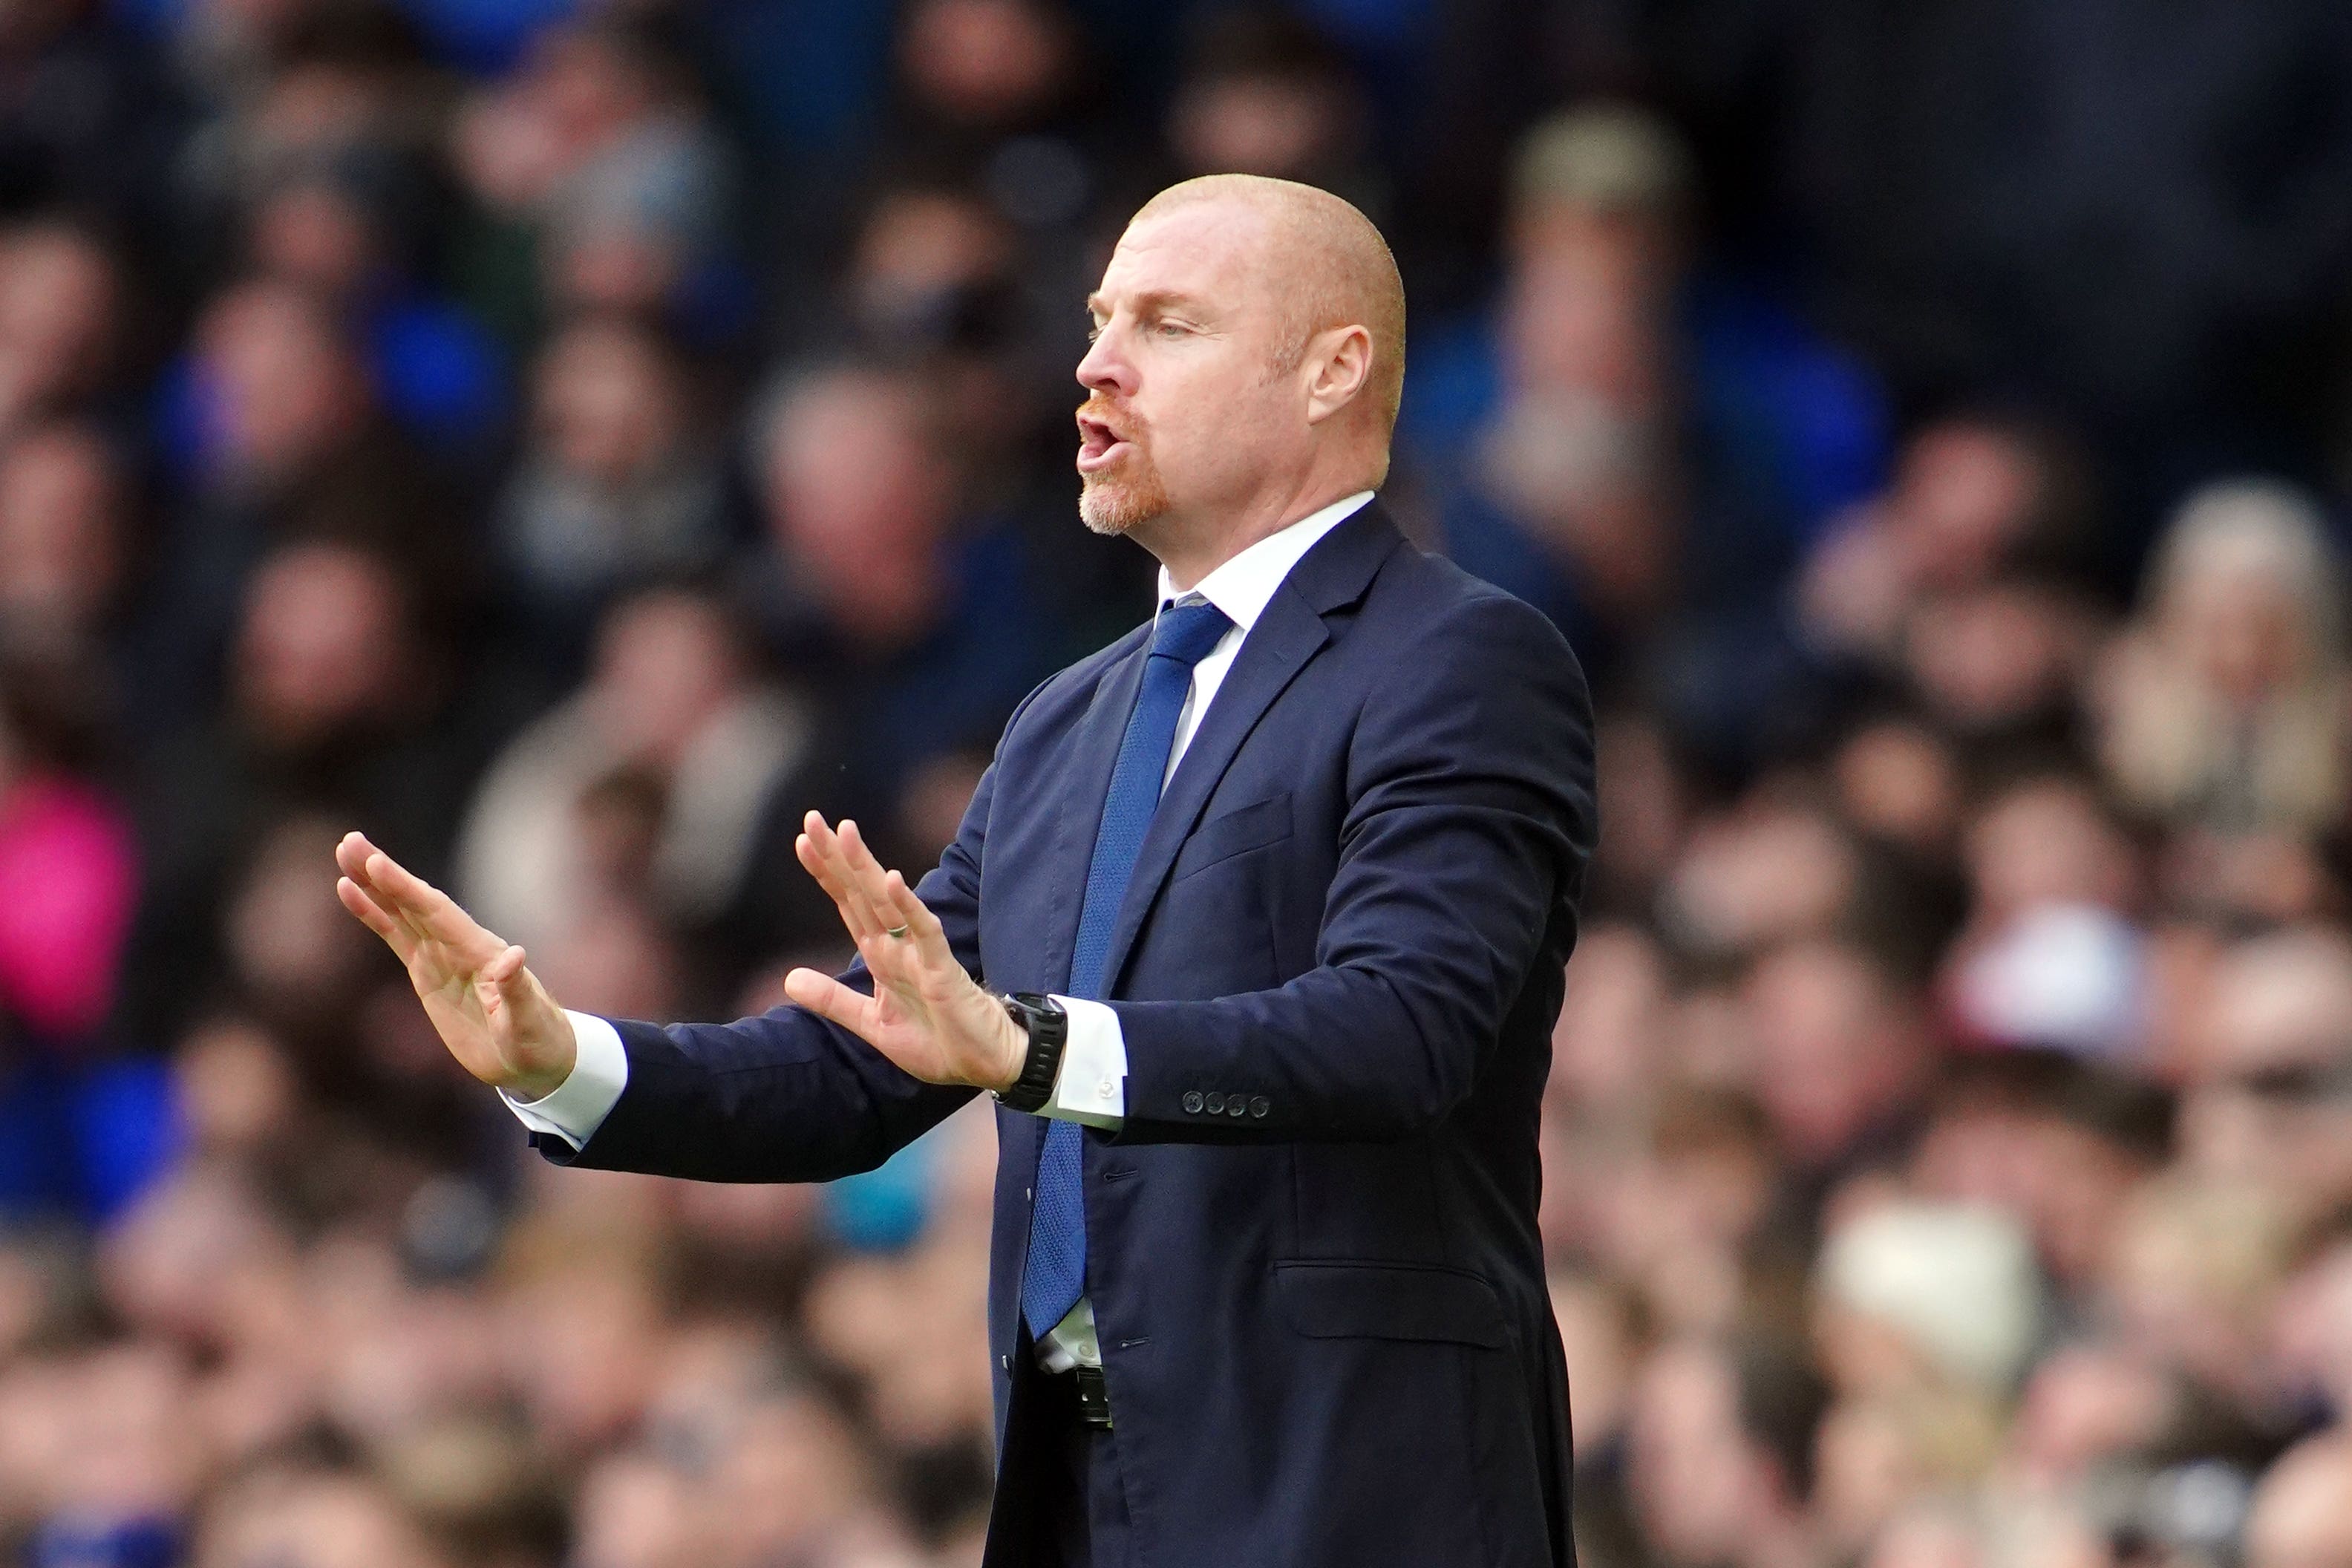 Everton manager Sean Dyche has focused on reinforcing his key messages rather than trying to lift the players’ mood ahead of their relegation decider at home to Bournemouth (Peter Byrne/PA)